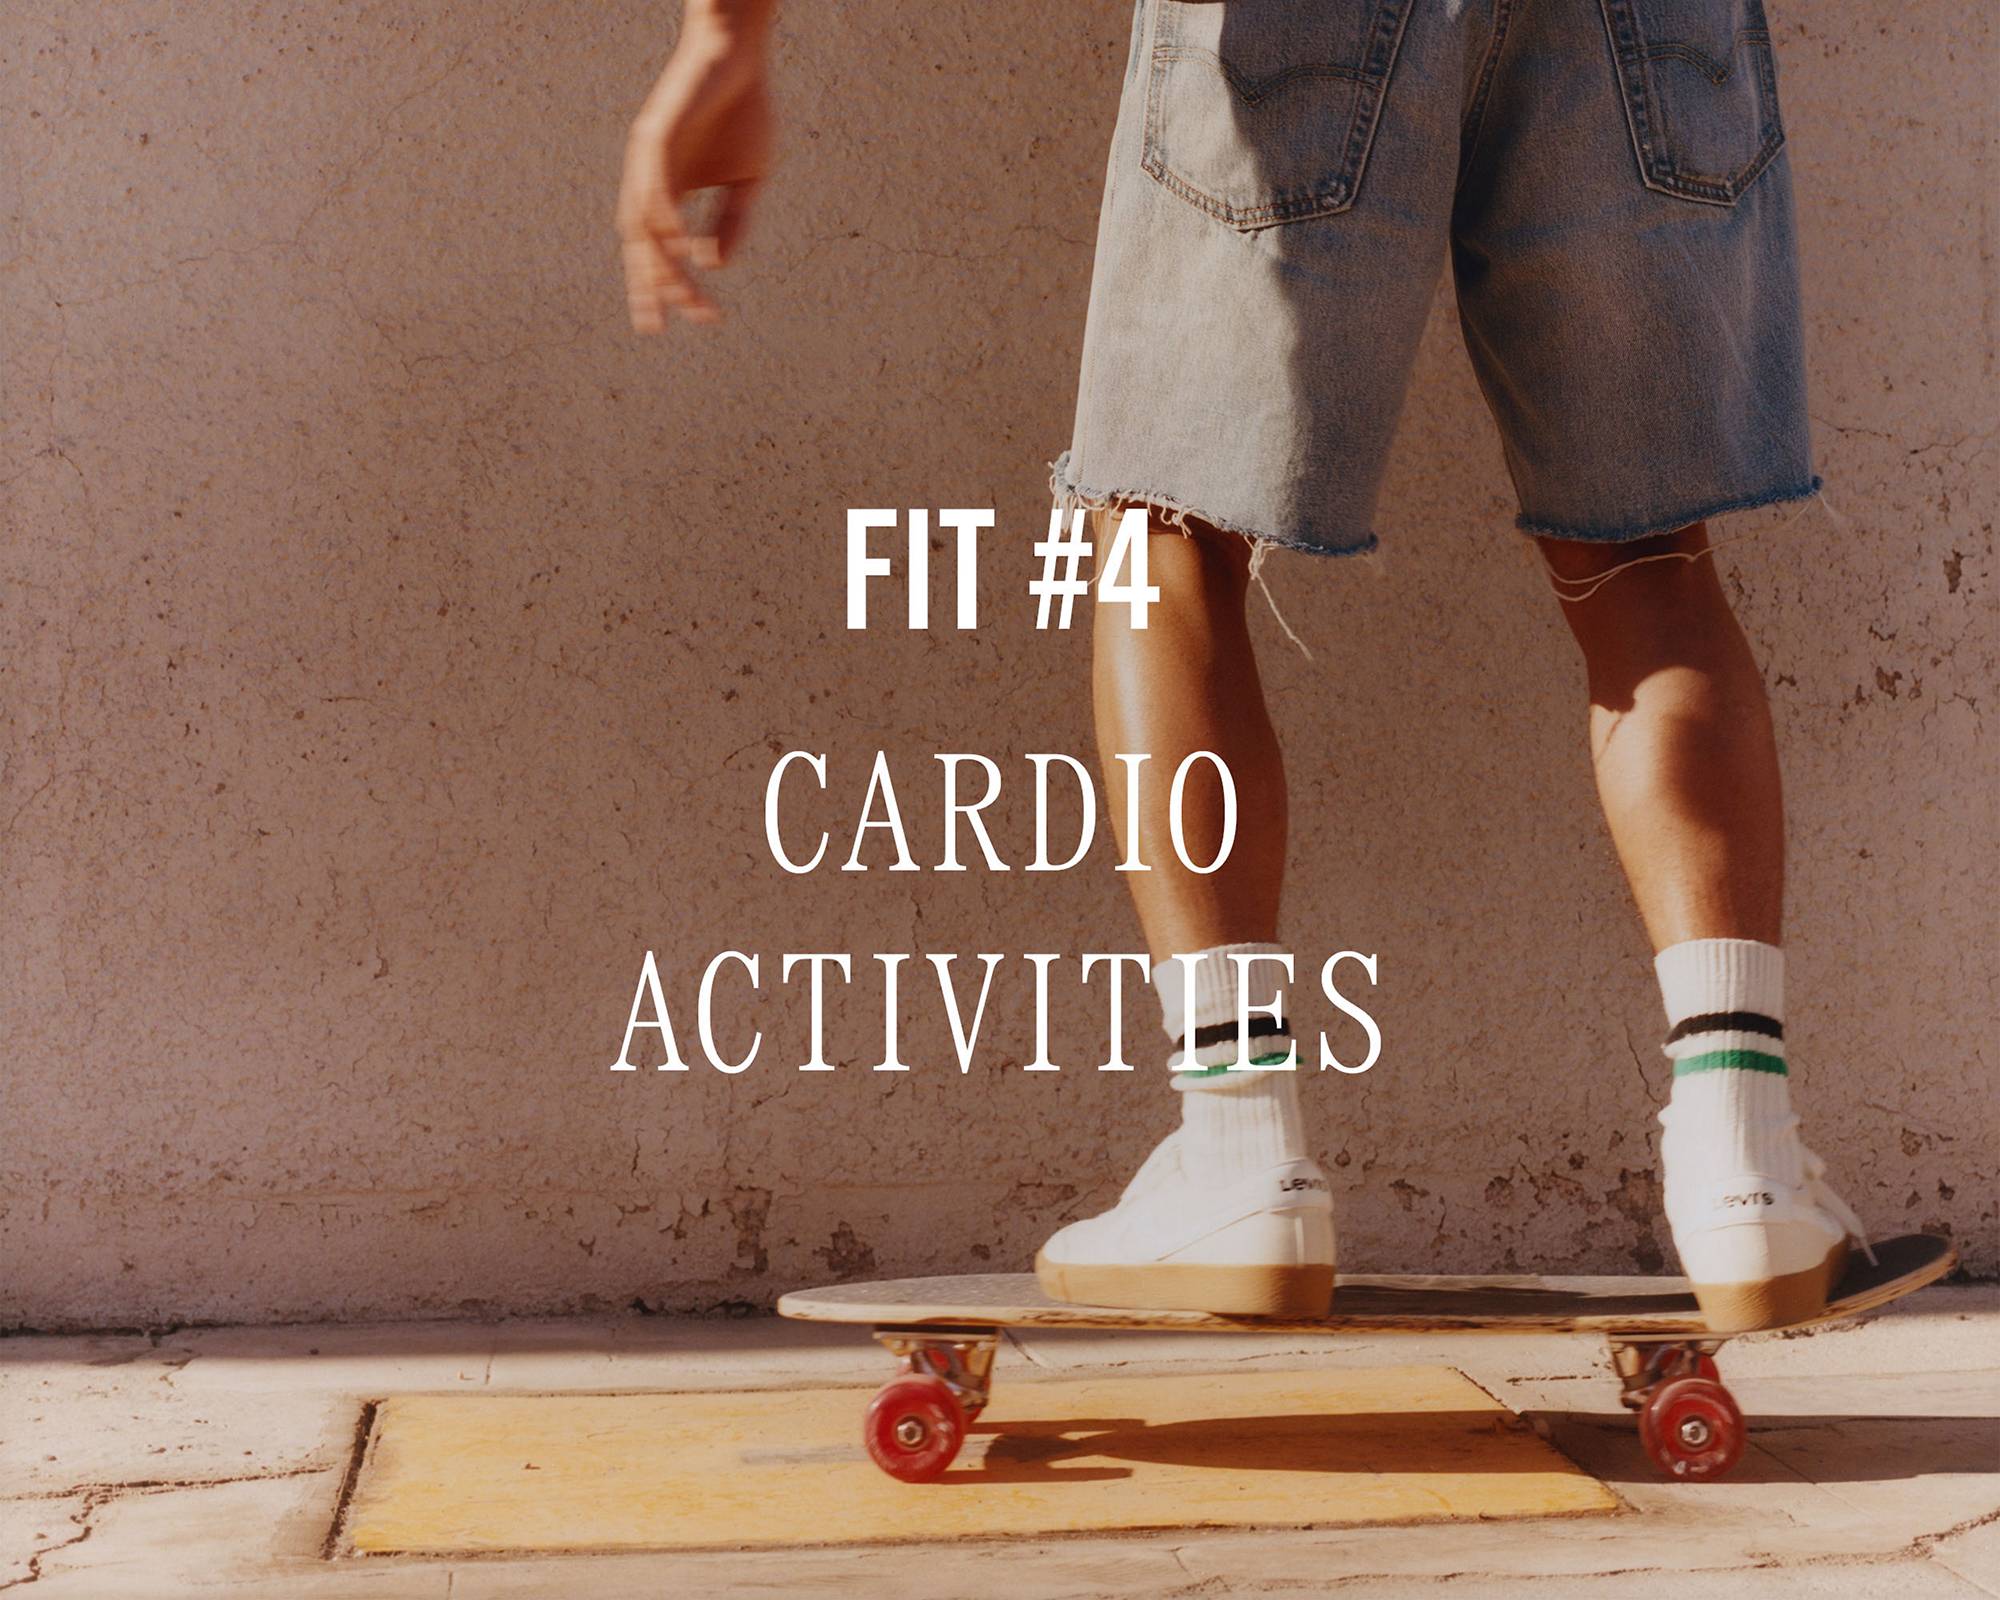 Image of model skateboarding with overlaid text "Fit #4 CARDIO ACTIVITIES"